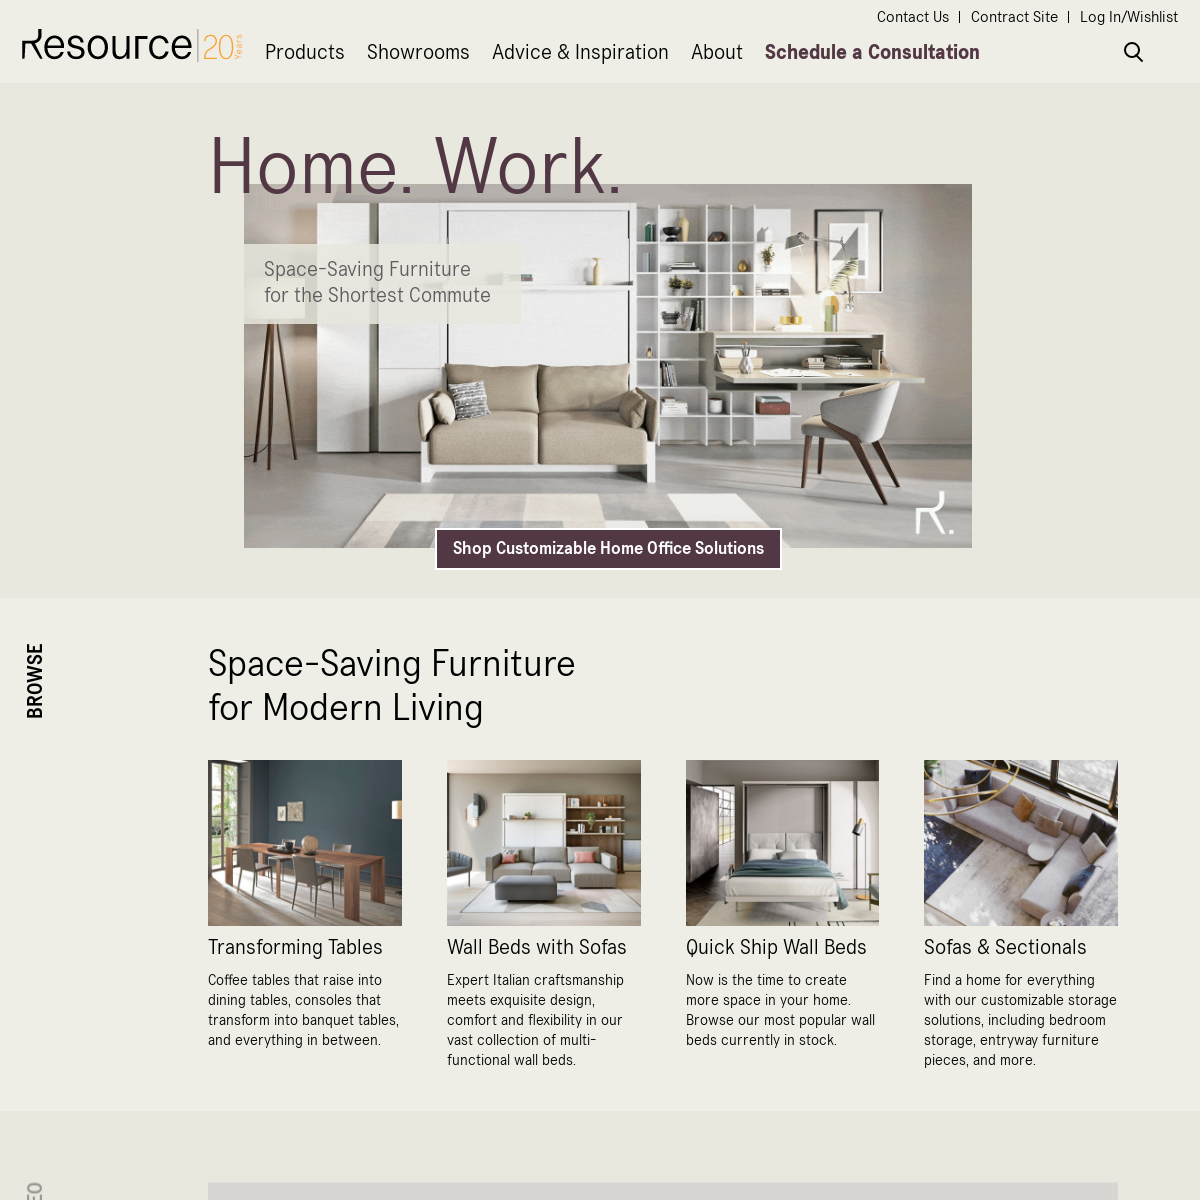 A complete backup of resourcefurniture.com